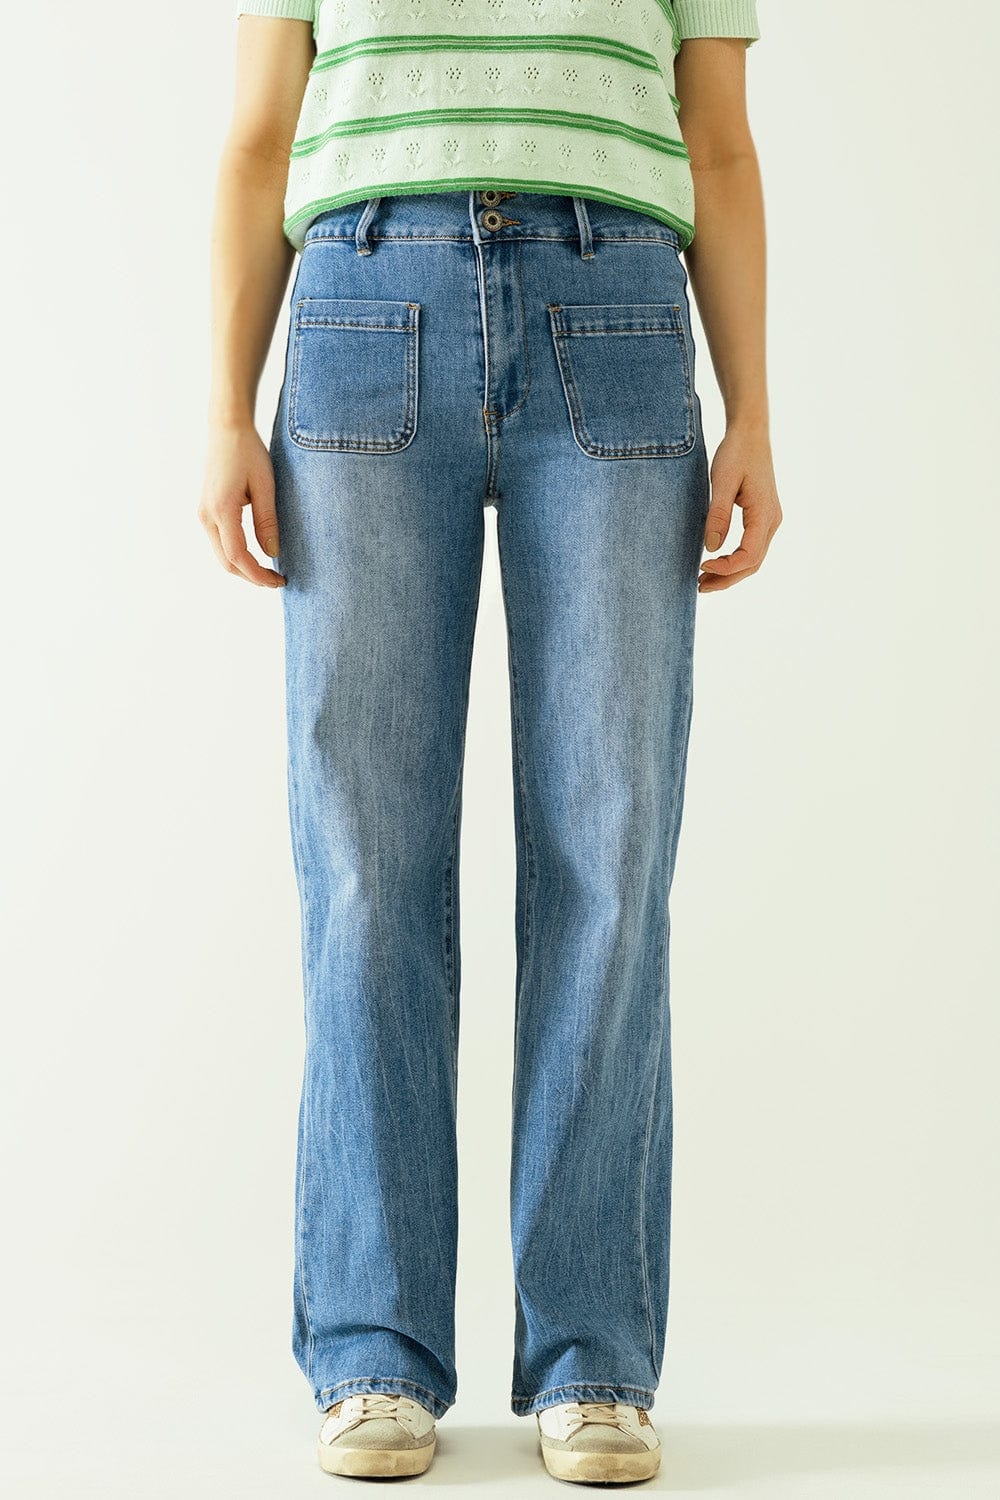 Q2 Women's Jean Jeans Wide Legs With Front Closure With Metalic Buttons And Front Pockets